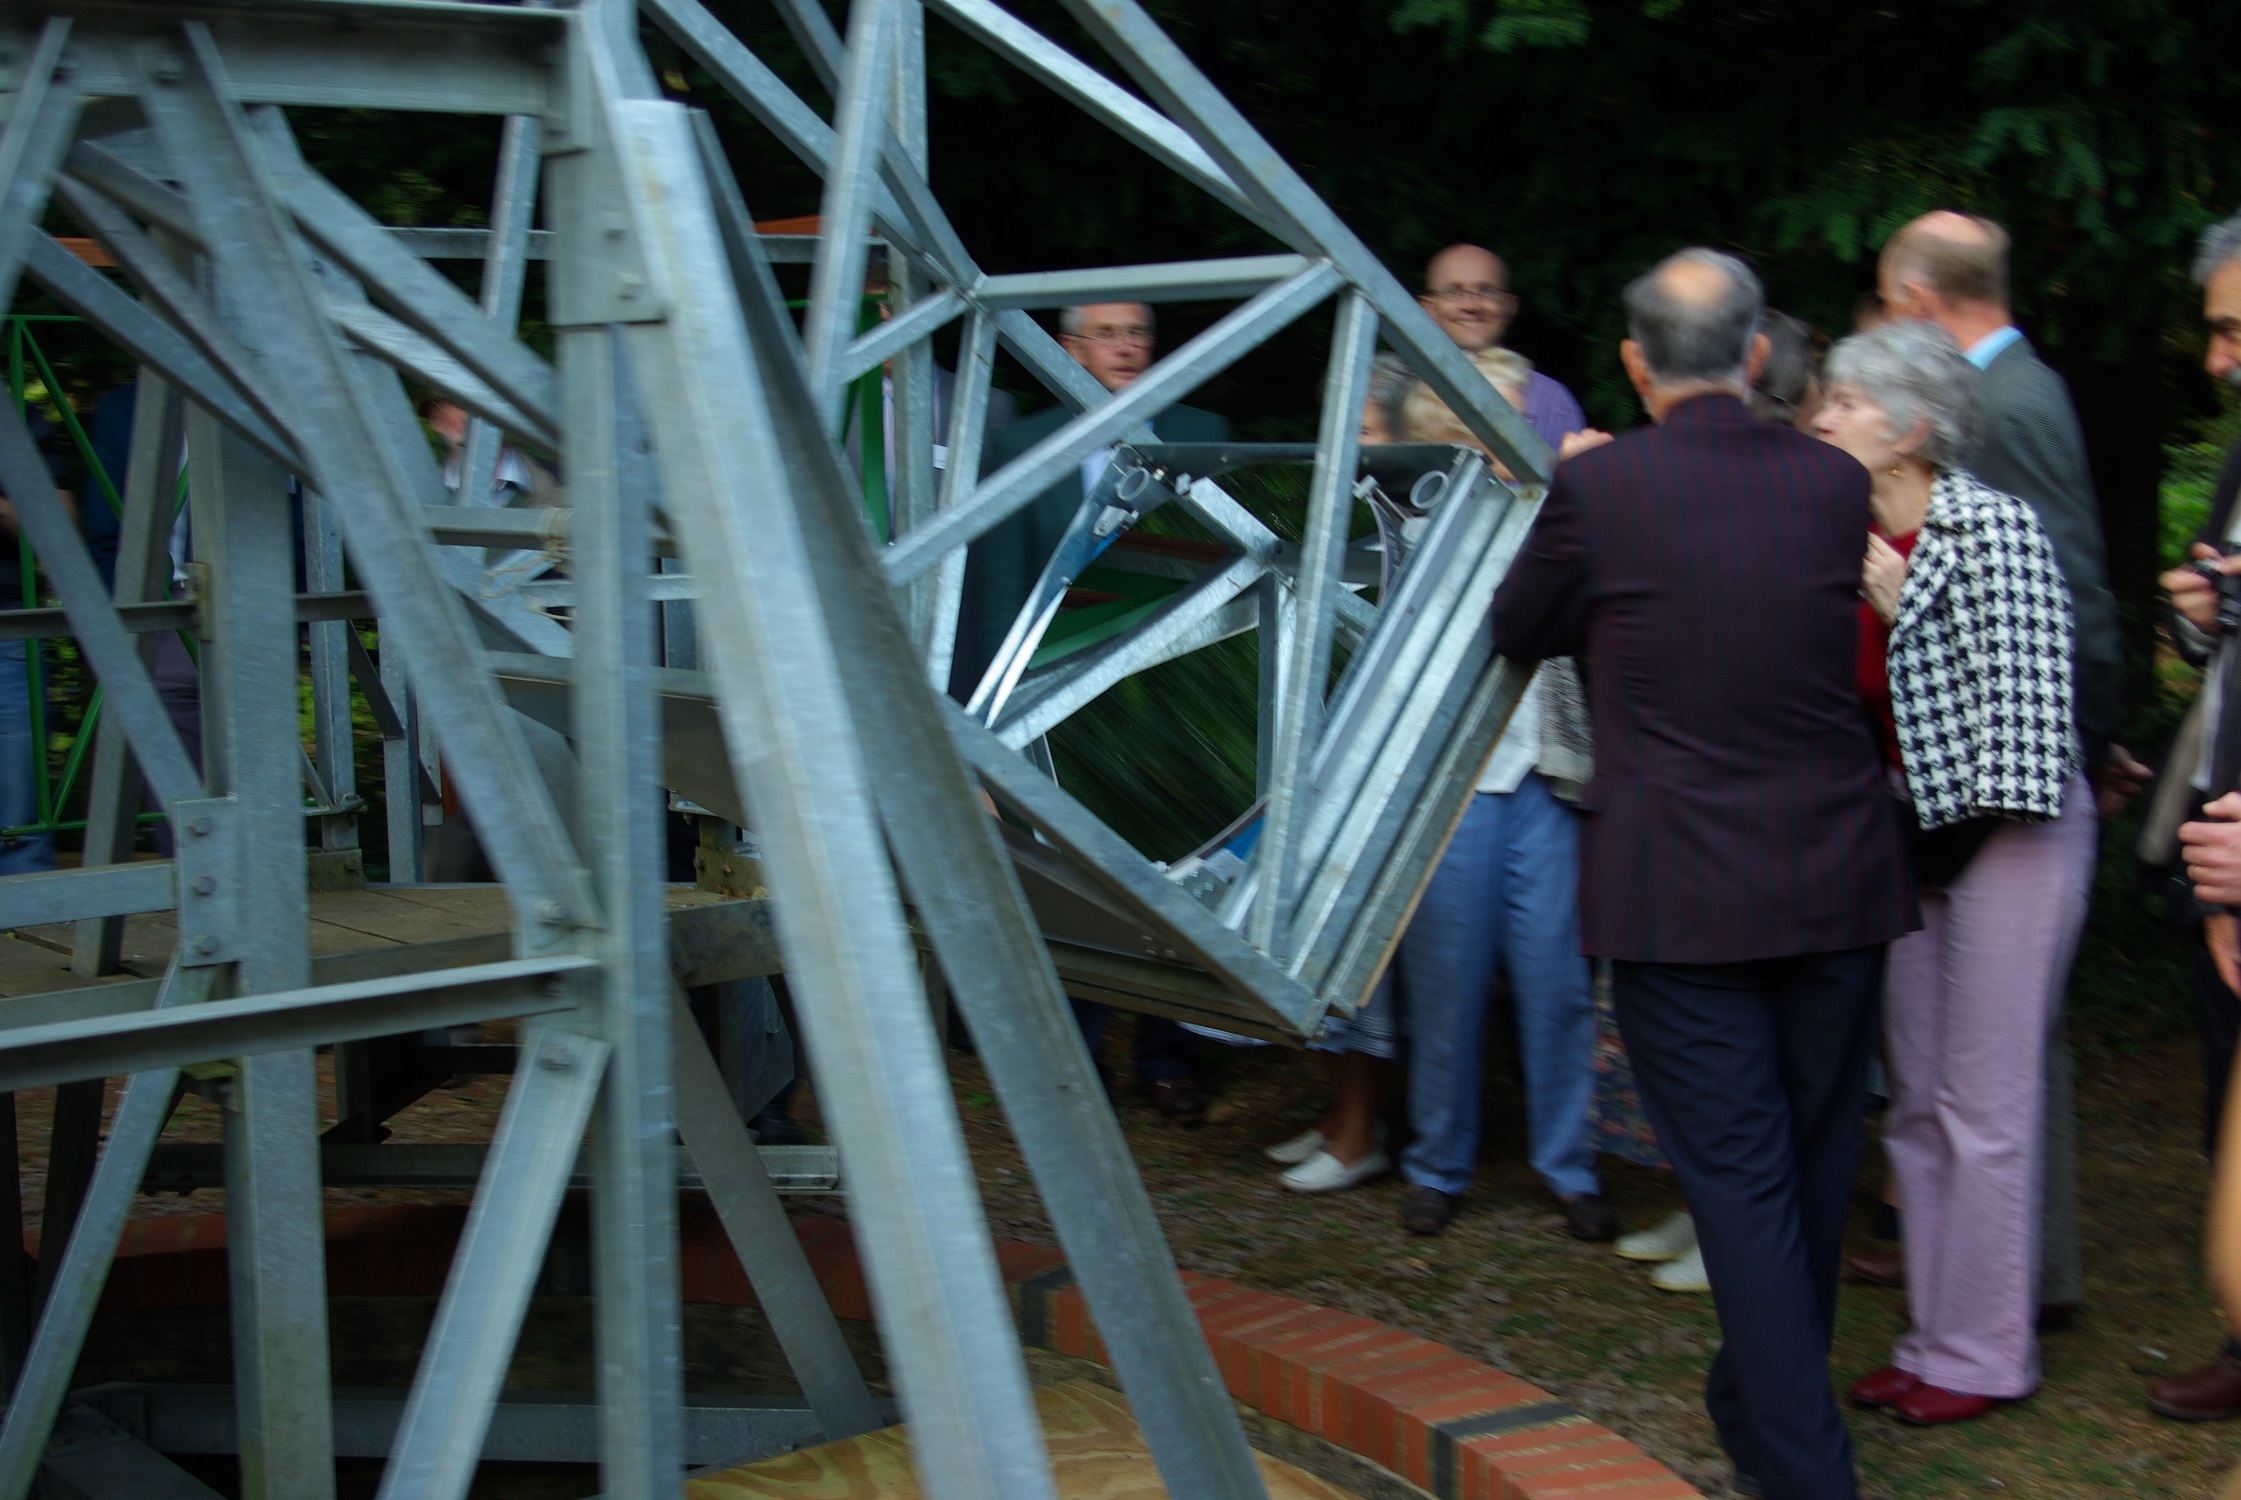 The 30-inch primary mirror at the official opening of the telescope in 2009